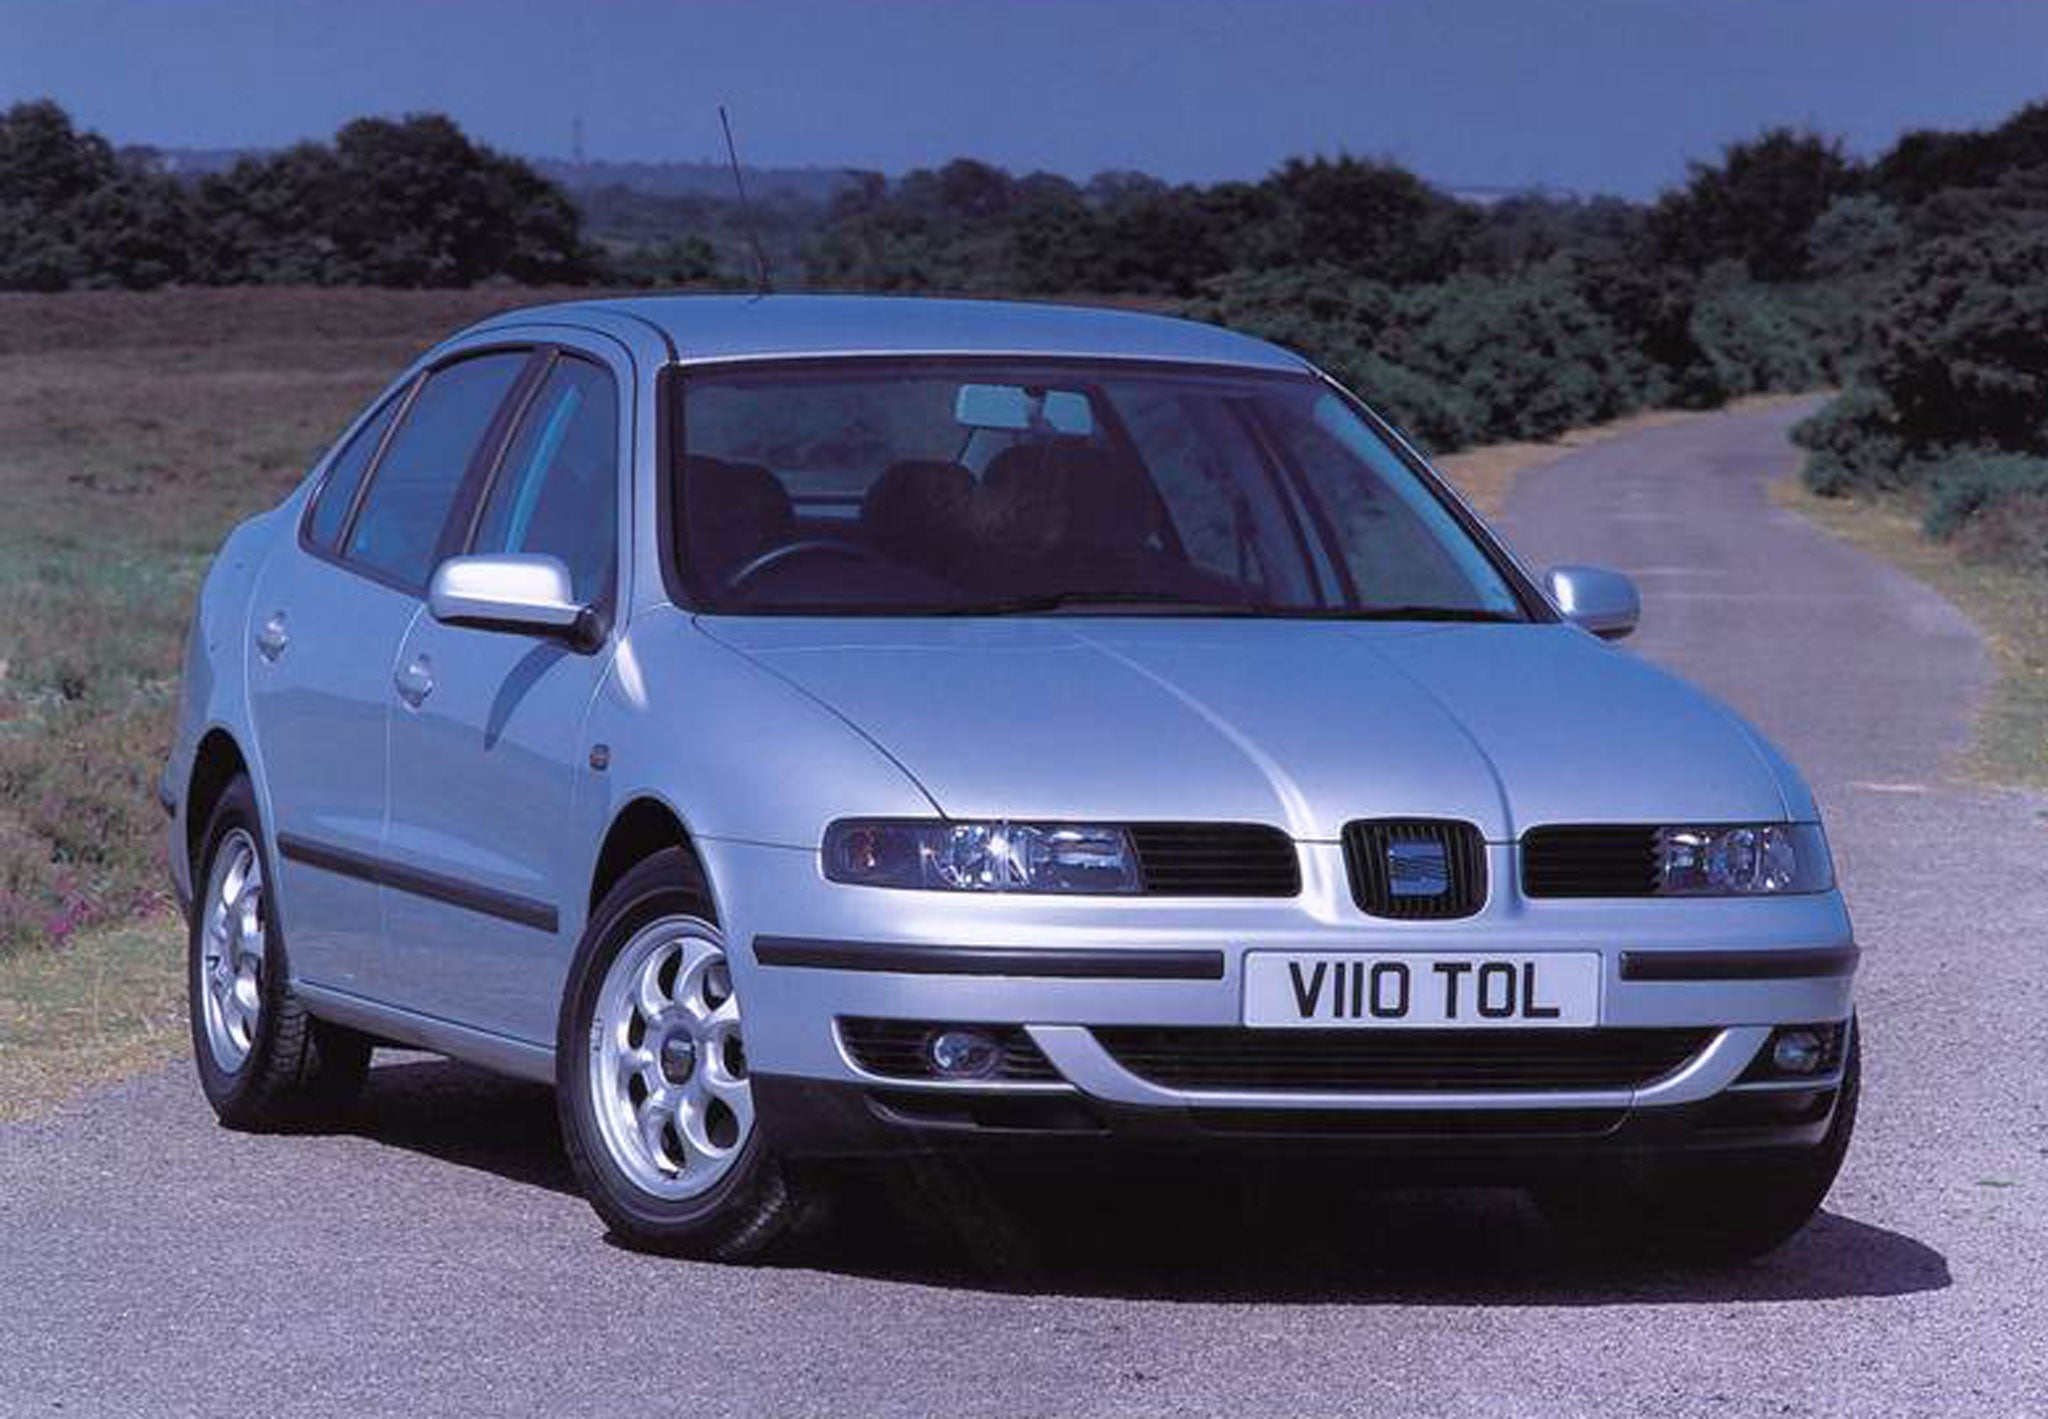 The Seat Toledo is closely related to the booted VW Golf